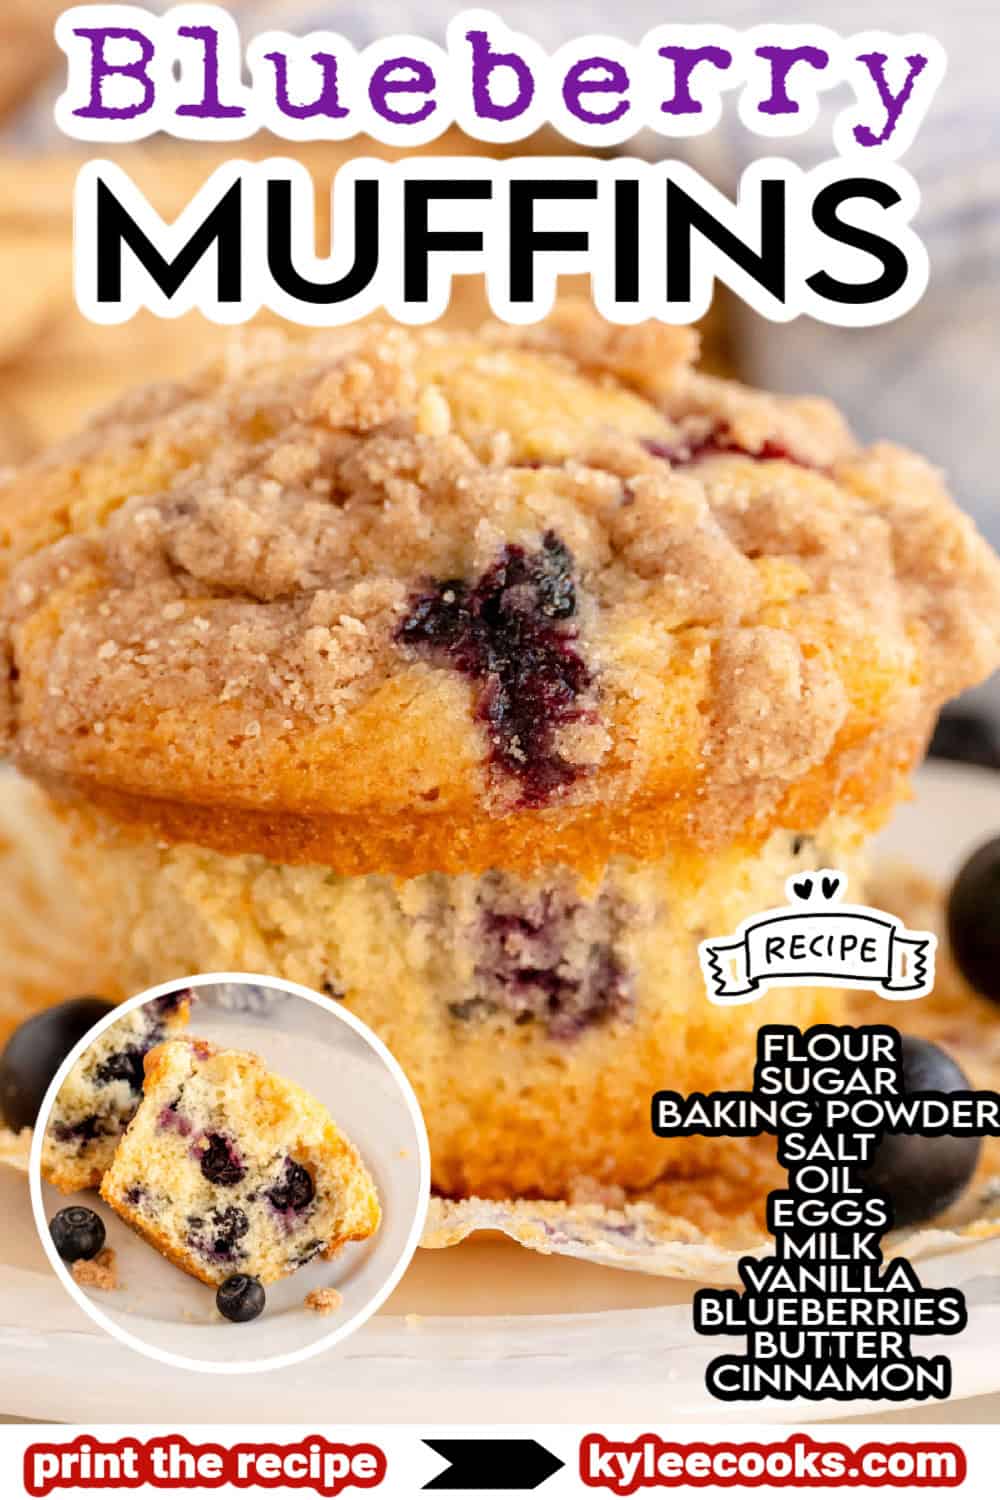 a blueberry muffin with recipe name and ingredients overlaid in text.